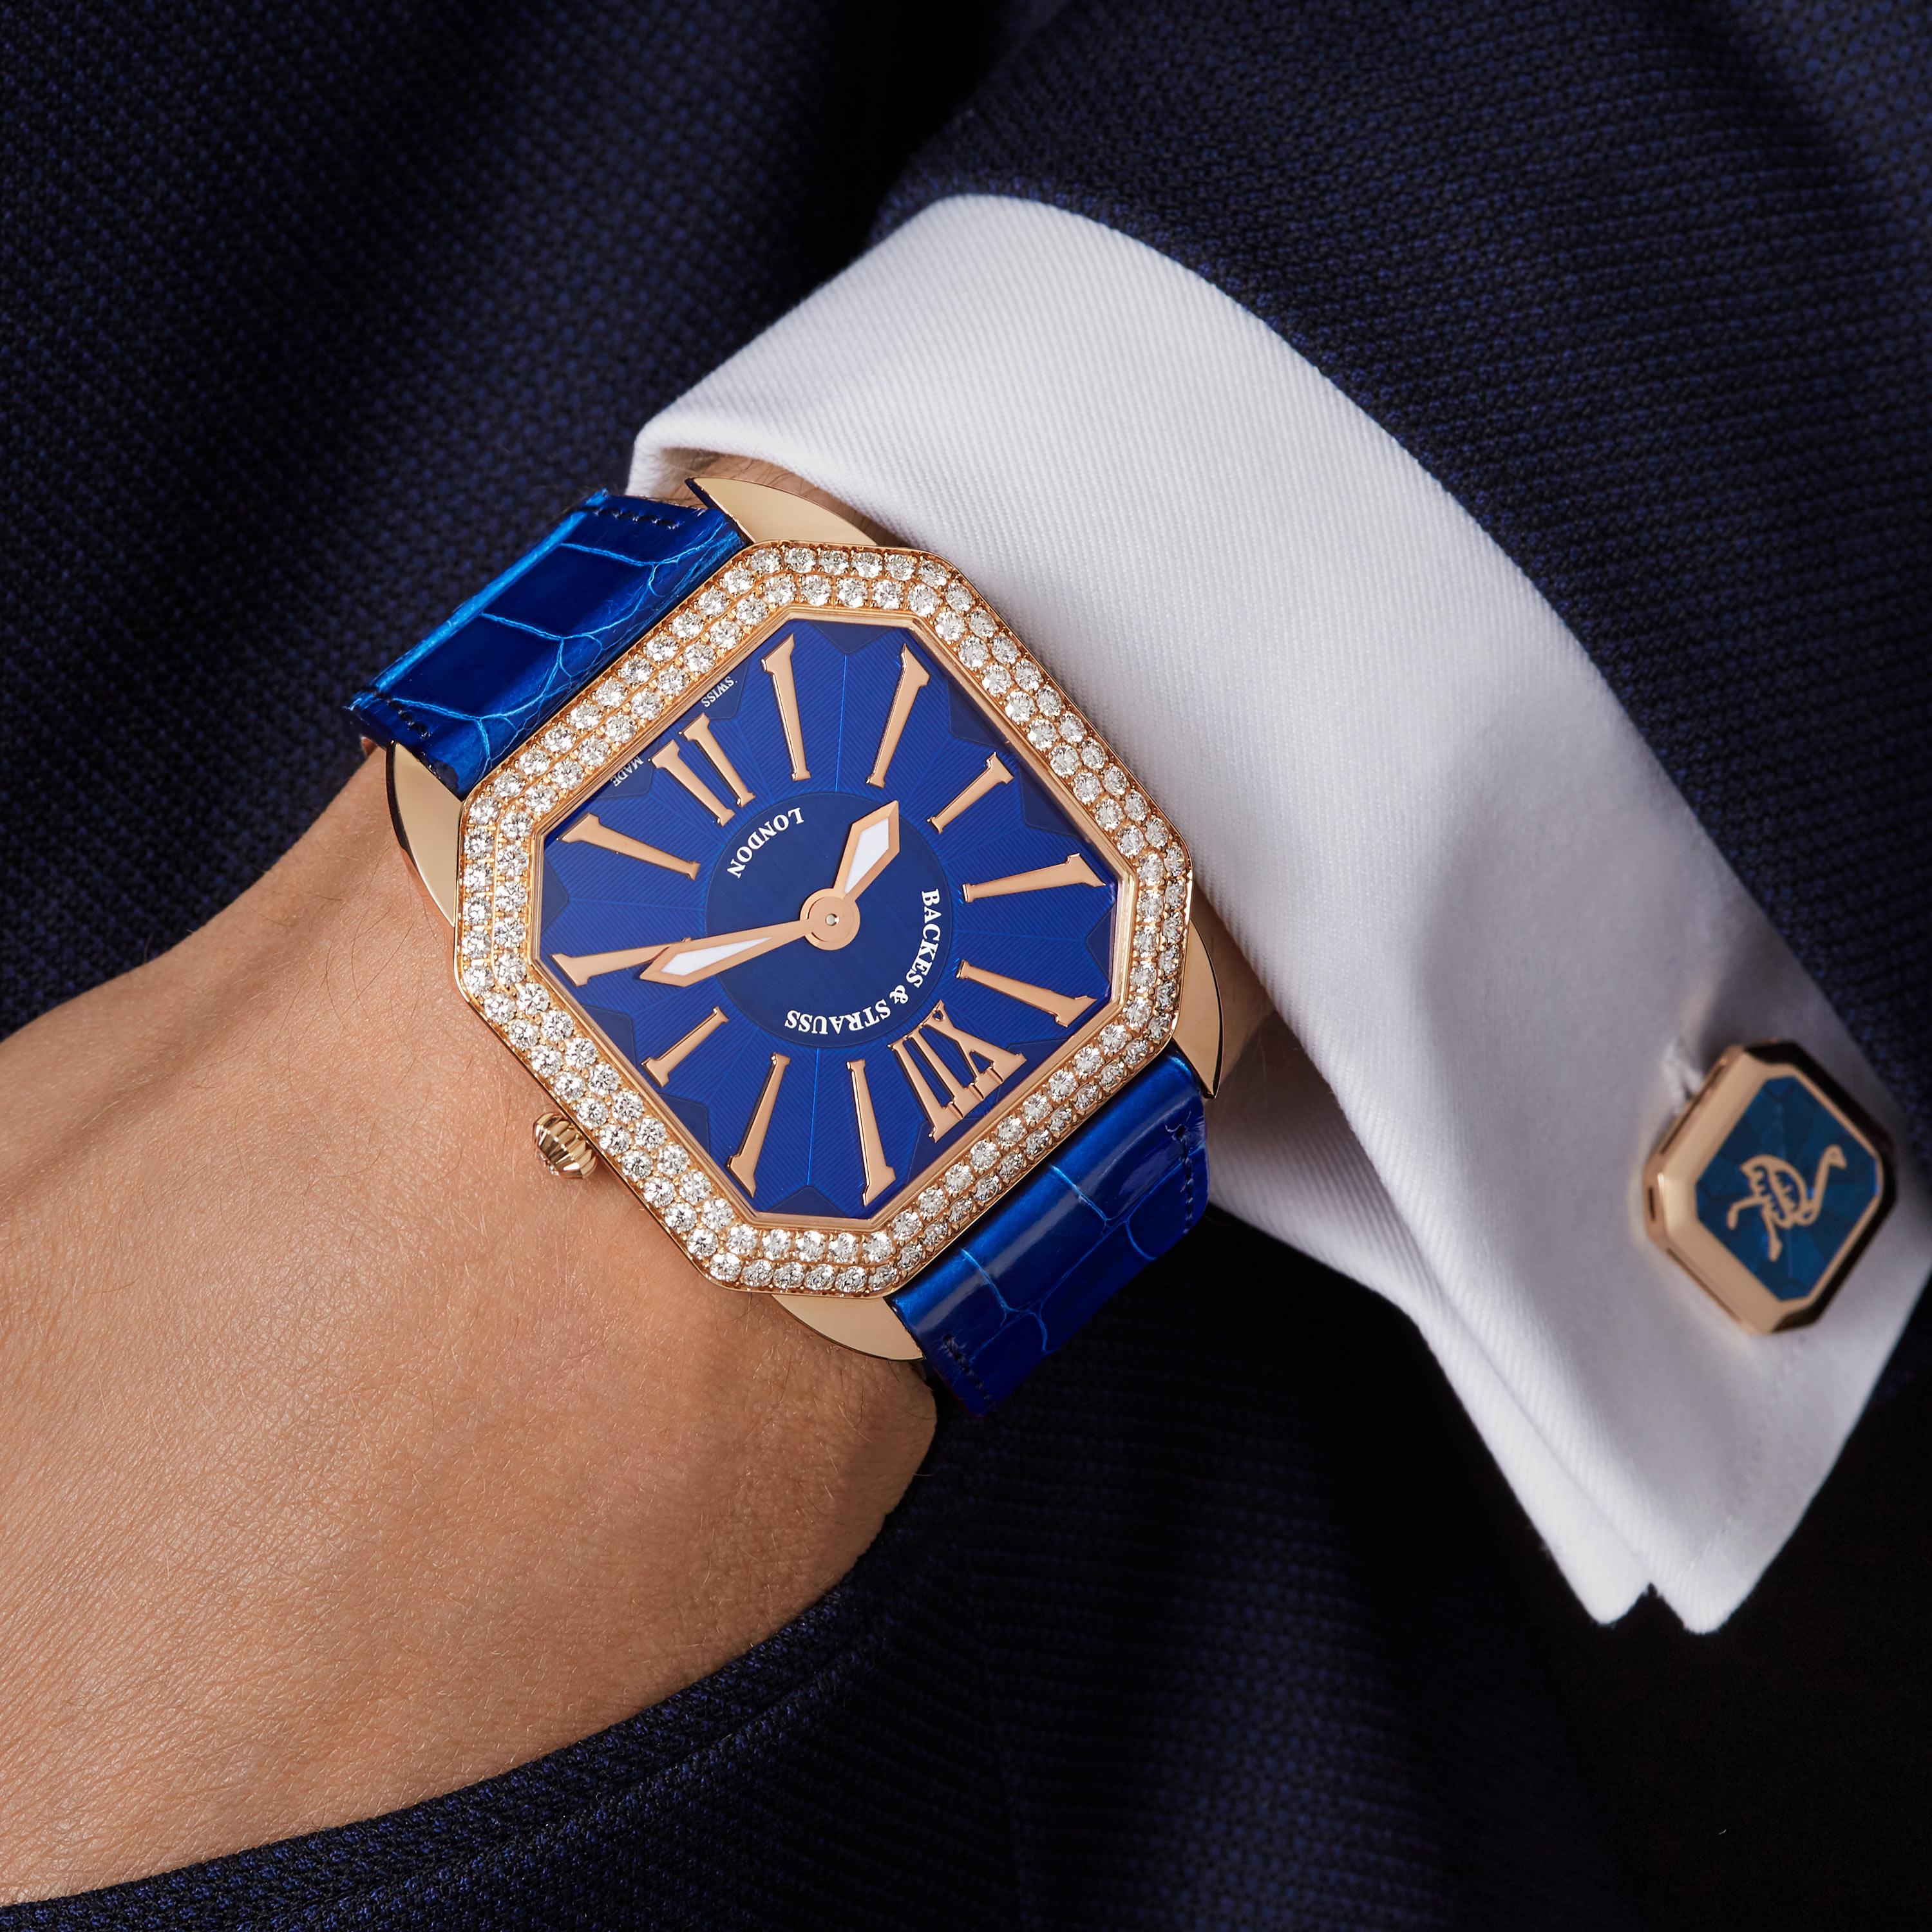 Berkeley Renaissance 43 is a luxury diamond watch for men crafted in 18kt Rose gold, featuring a blue square dial with rose gold roman numerals, mechanical movement. The crown, buckle and case are set with white Ideal Cut diamond. It is a 43 mm